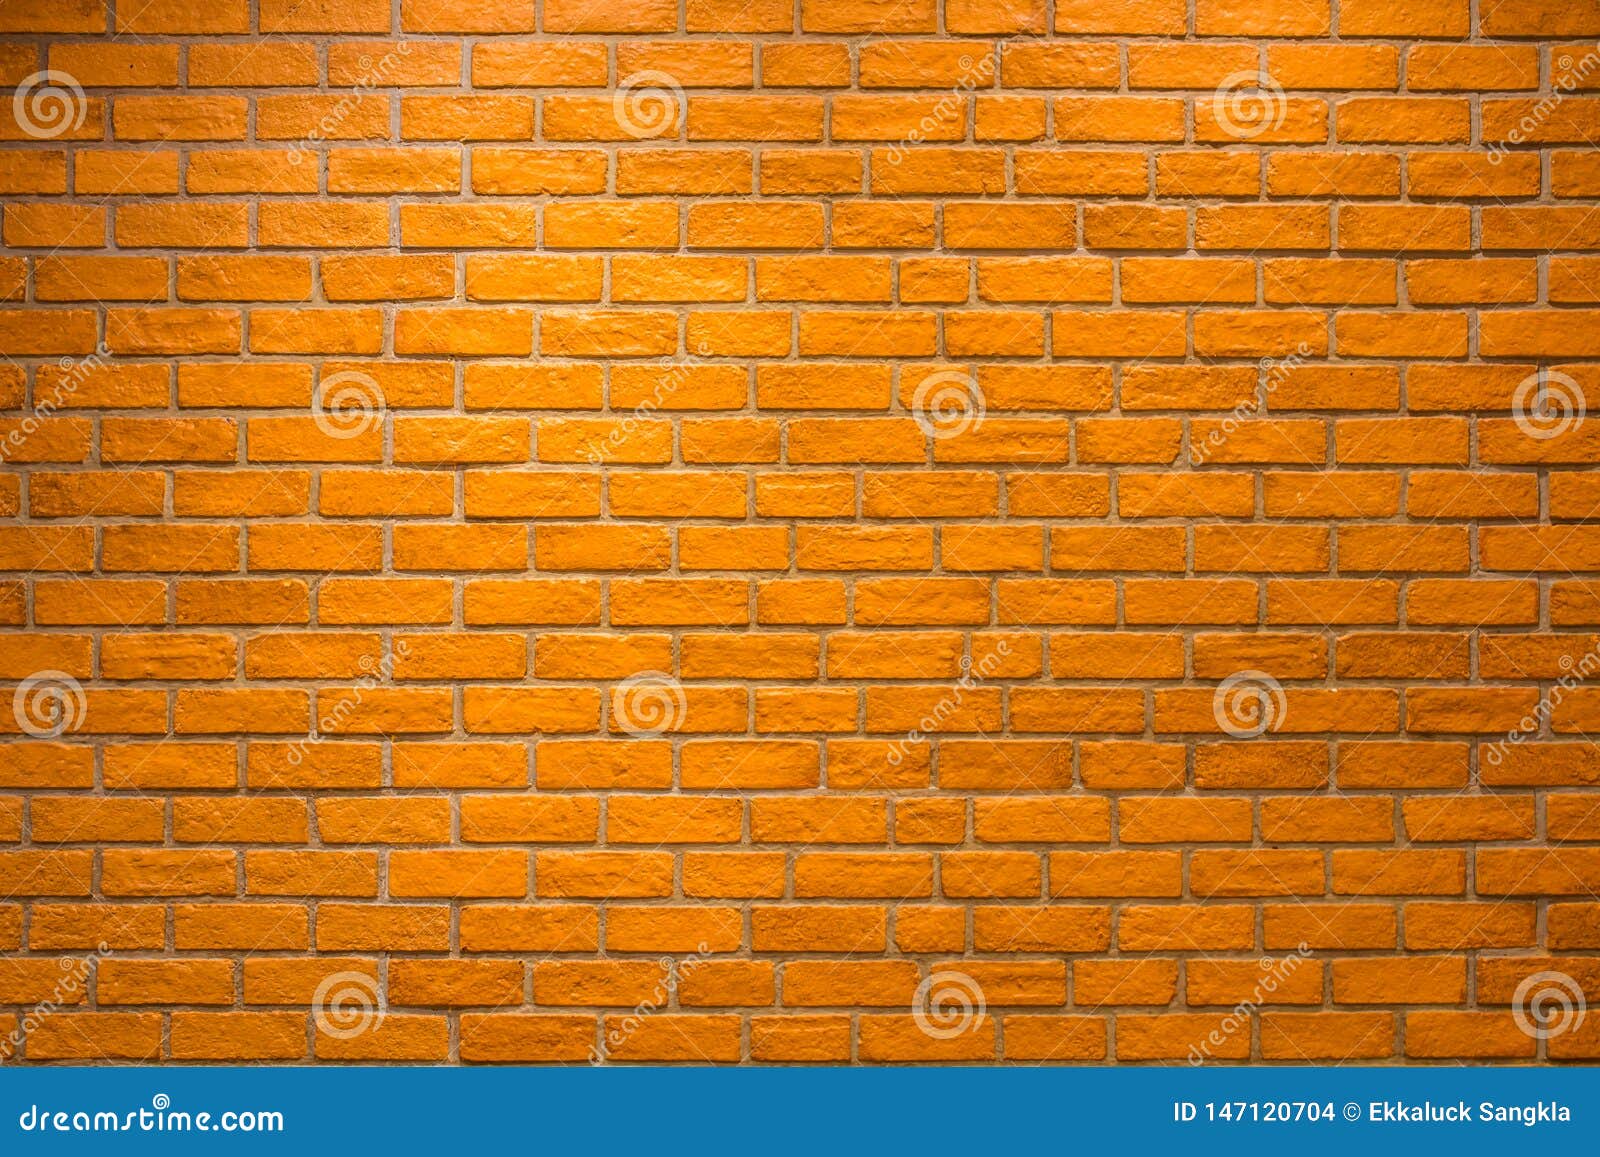 Wall Background, Sandstone Wall for Back Ground Picture, Old Grunge Brick Wall  Background Stock Photo - Image of background, backdrop: 147120704